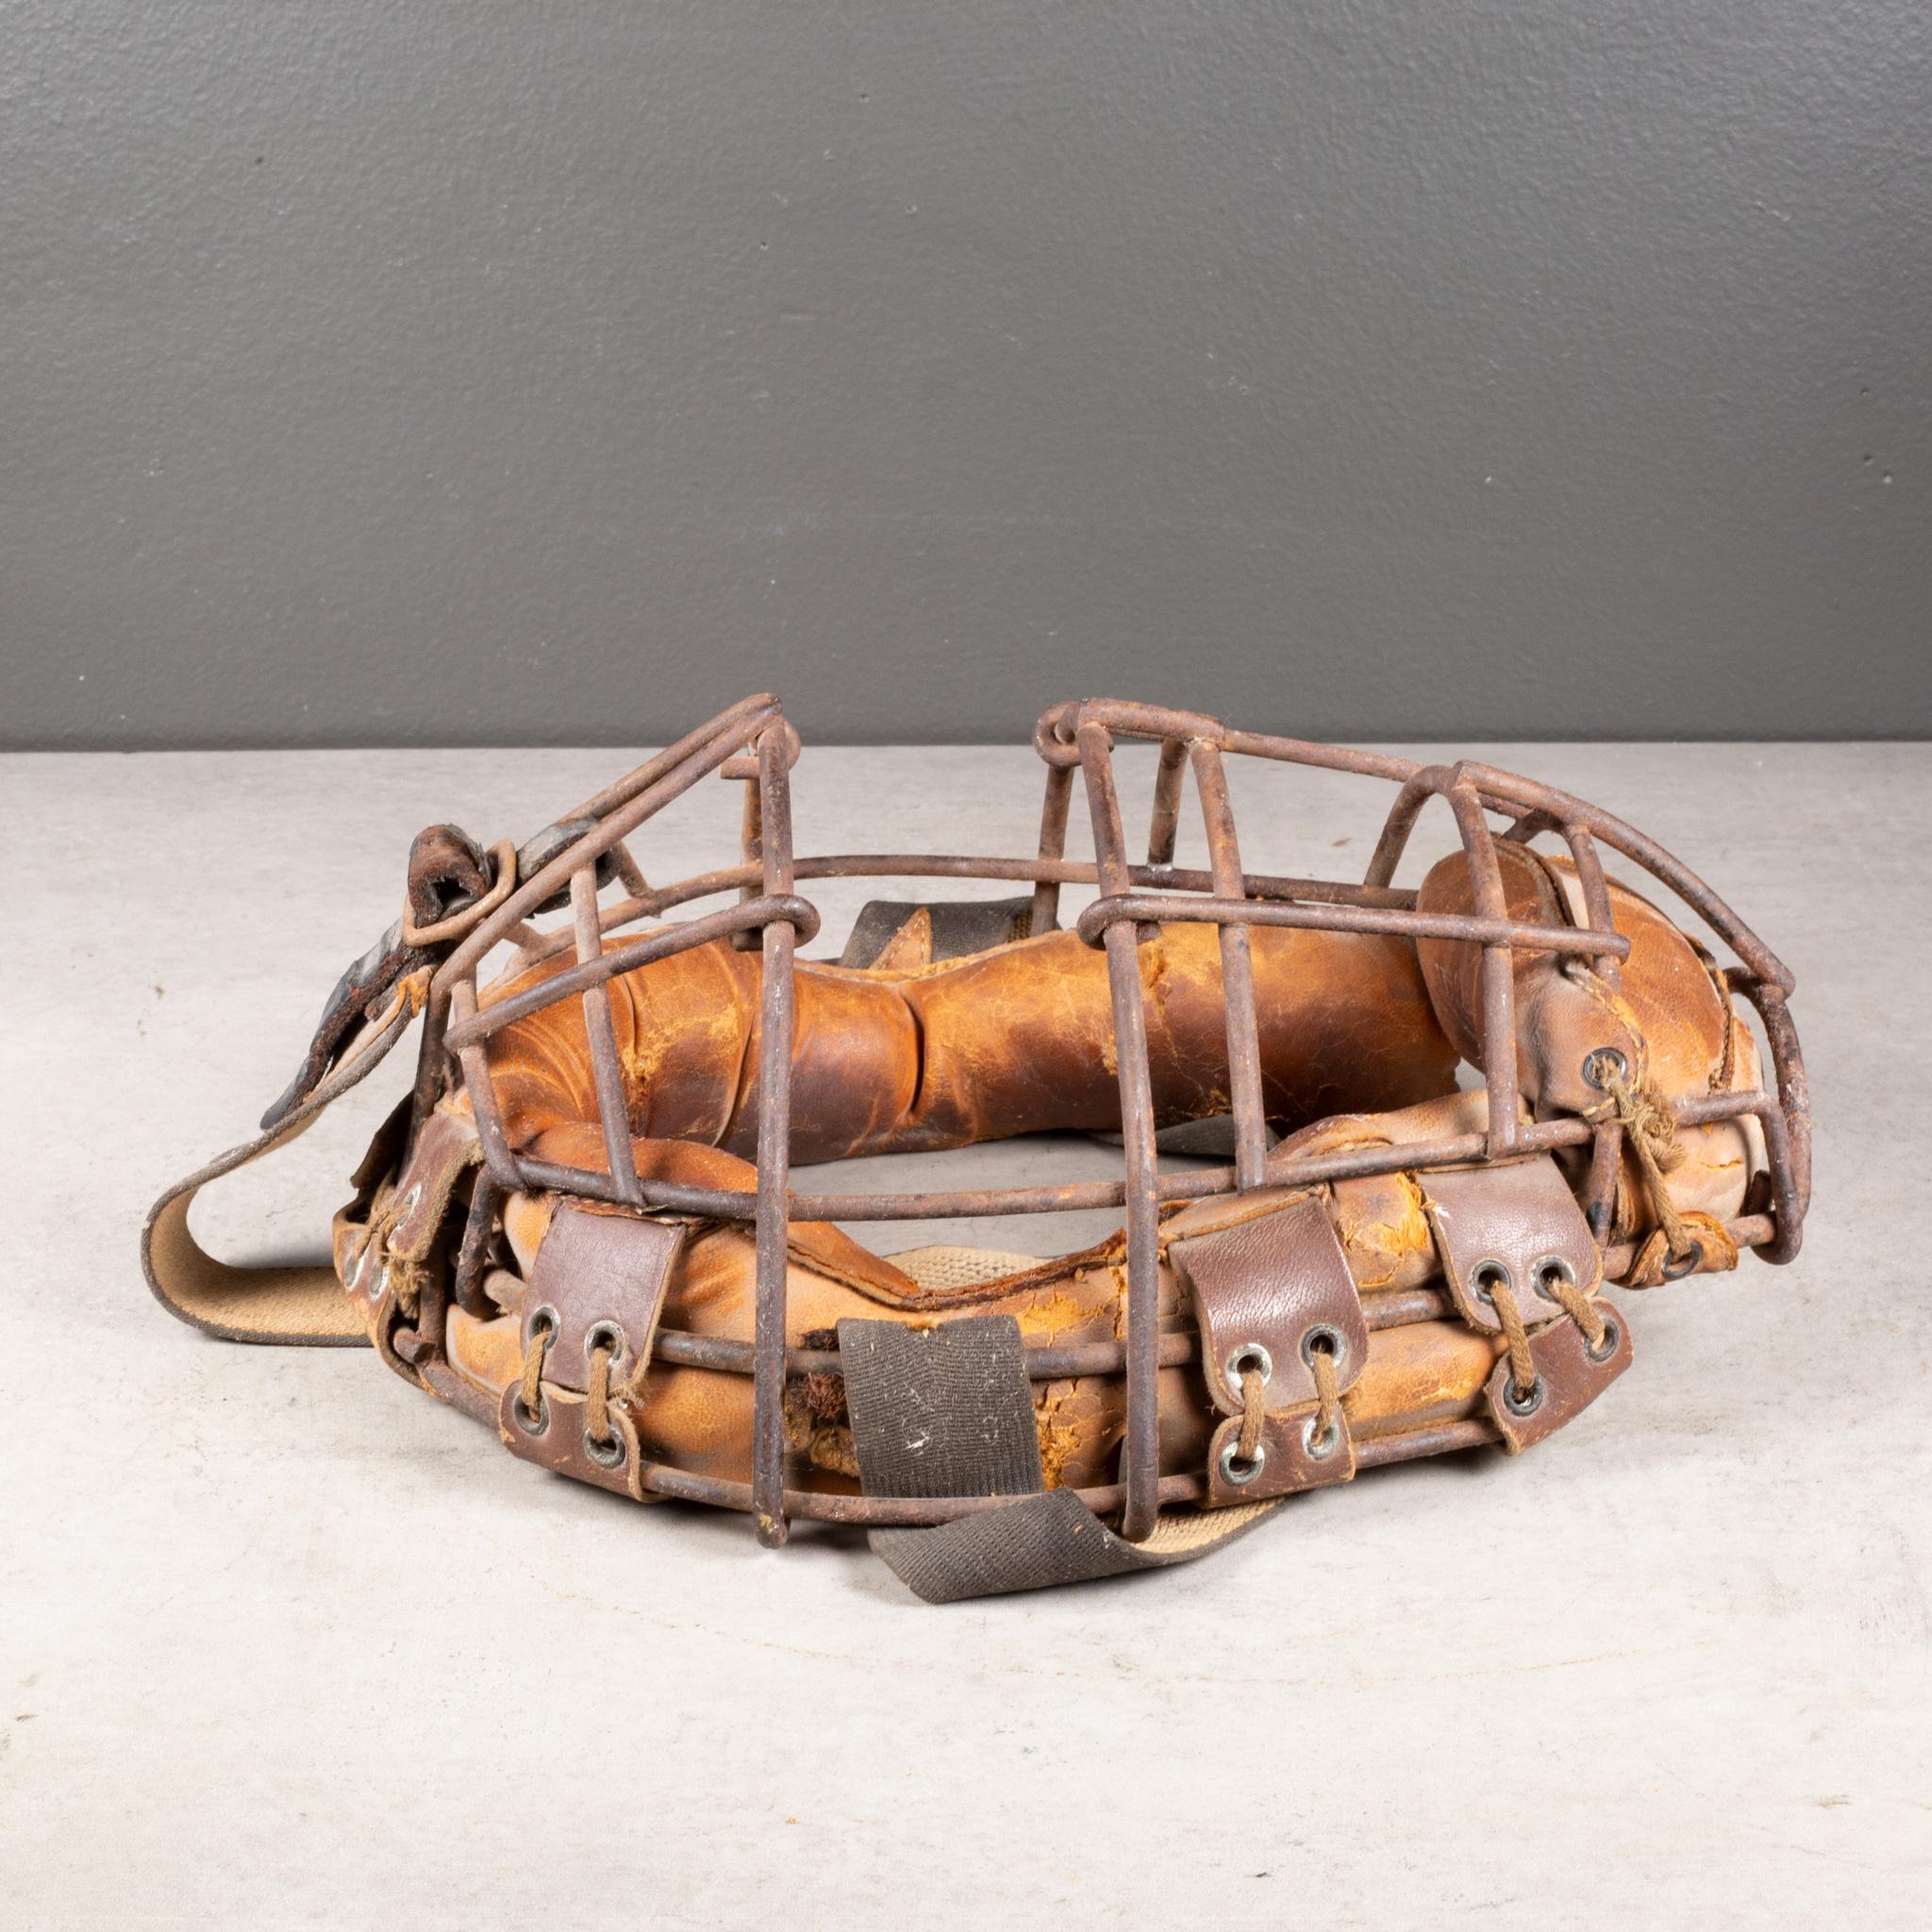 Industrial Vintage Wilson Catcher's Mask, circa 1940 (FREE SHIPPING) For Sale